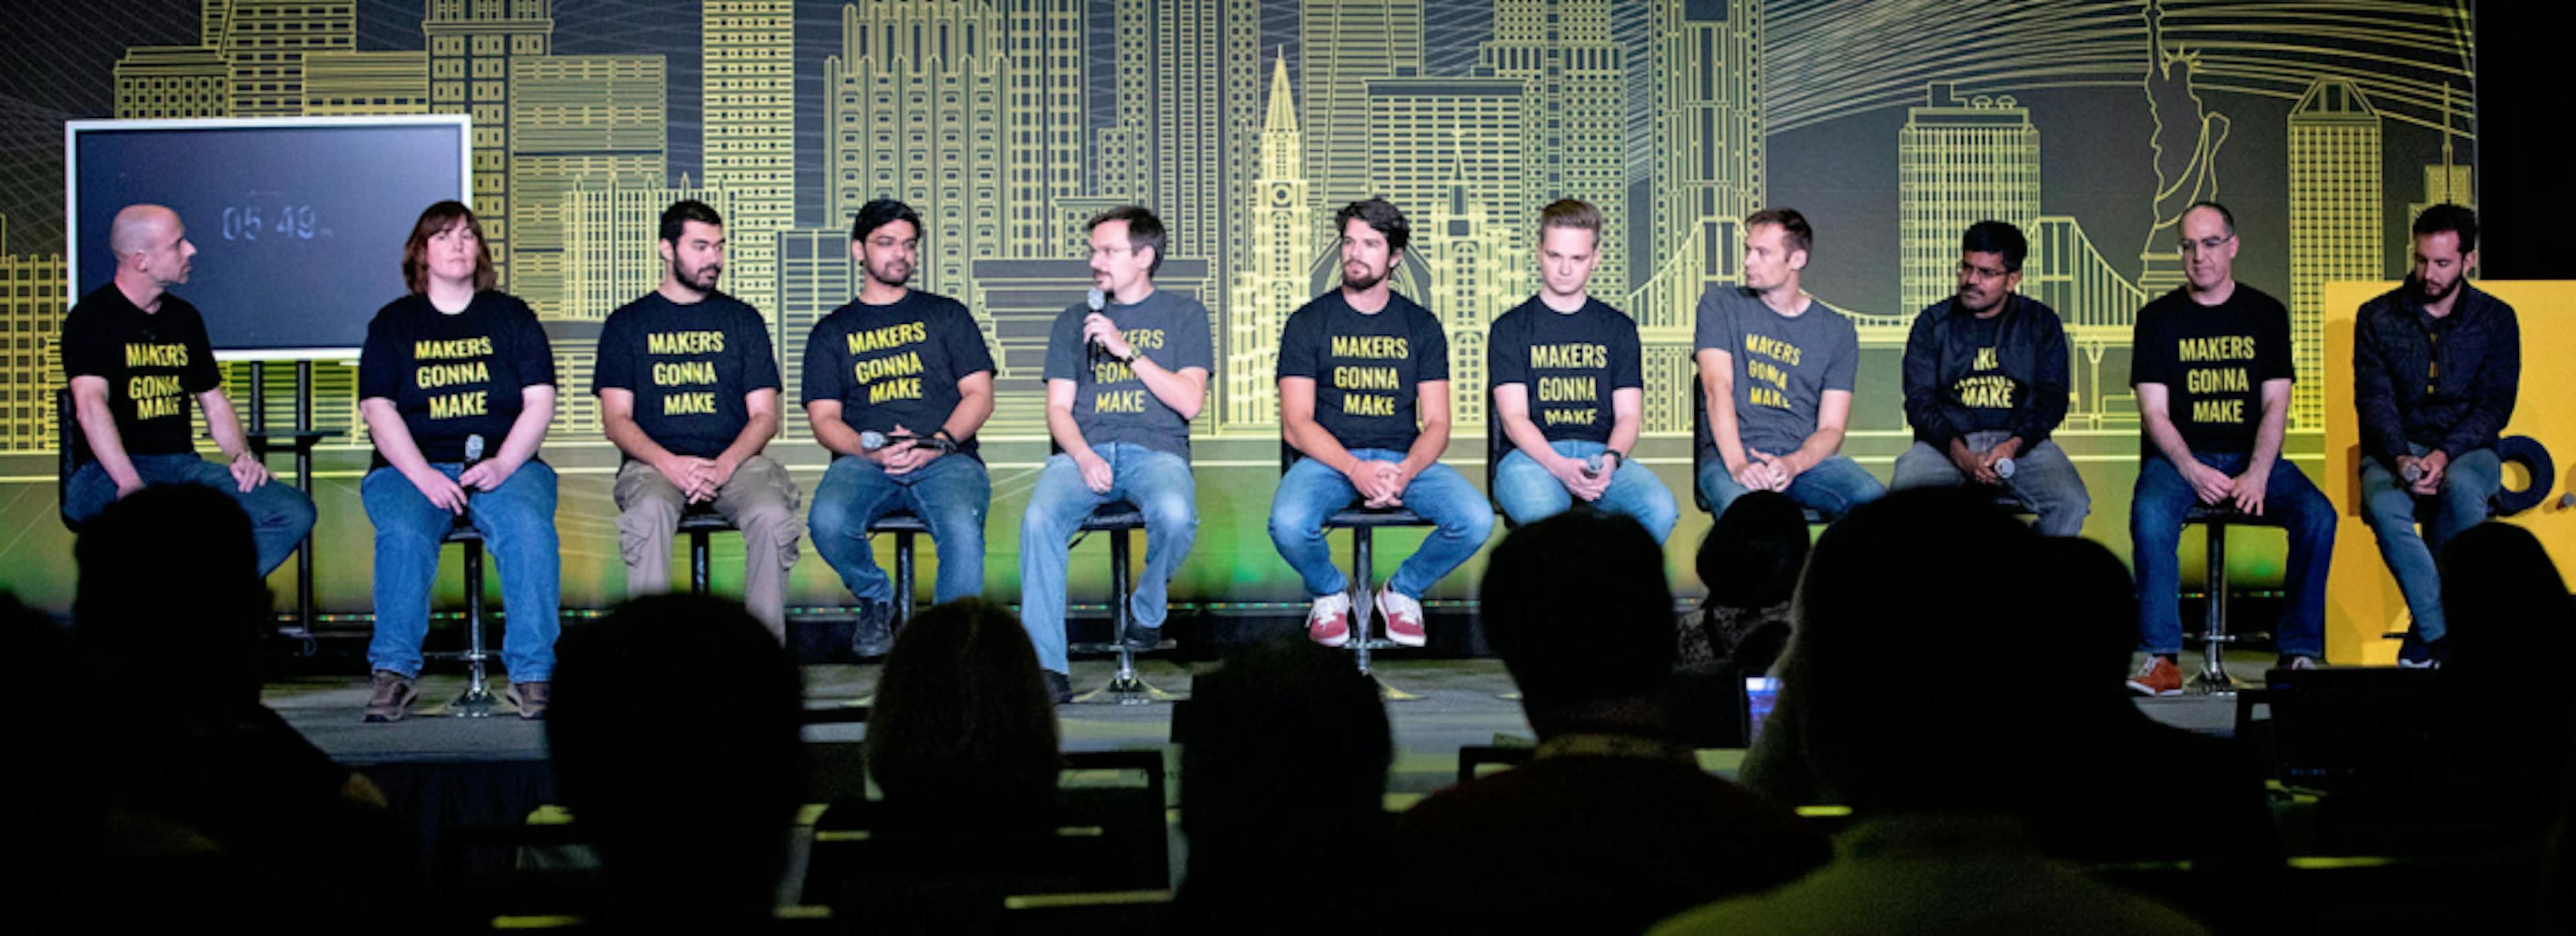 featured image - Takeaways And Quotes From The World’s Largest Kaggle GrandMaster Panel